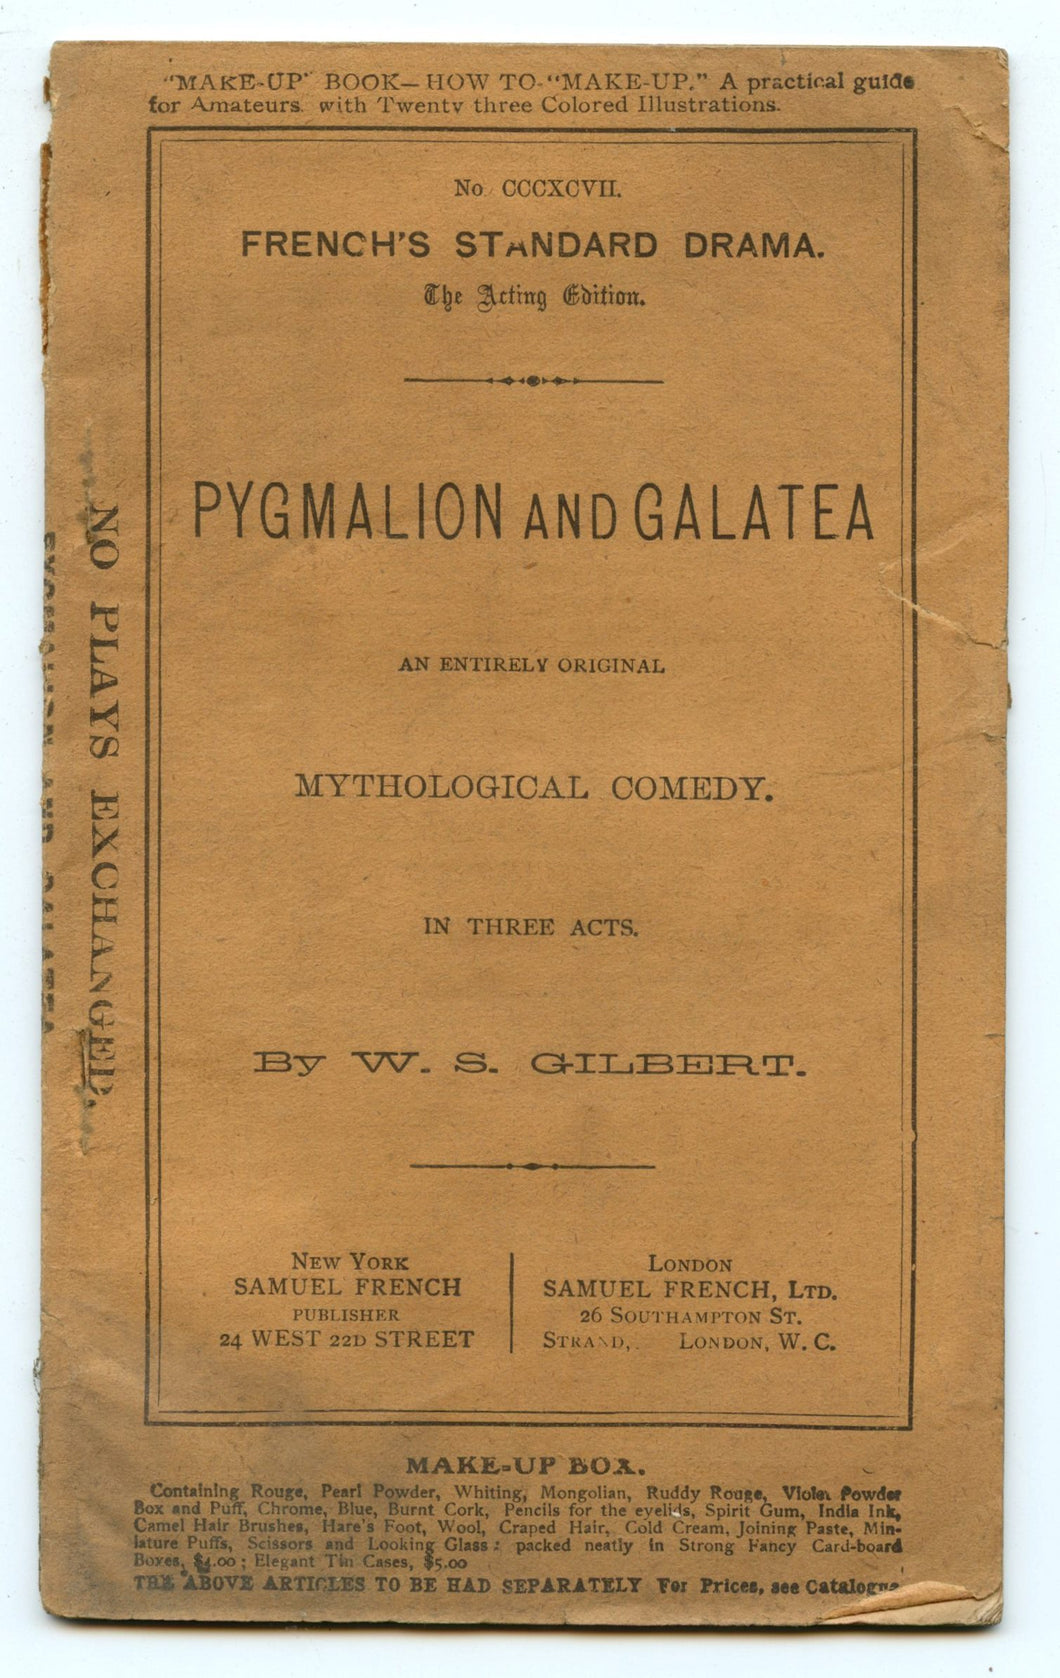 Pygmalion and Galatea: An Entirely Original Mythological Comedy. In Three Acts